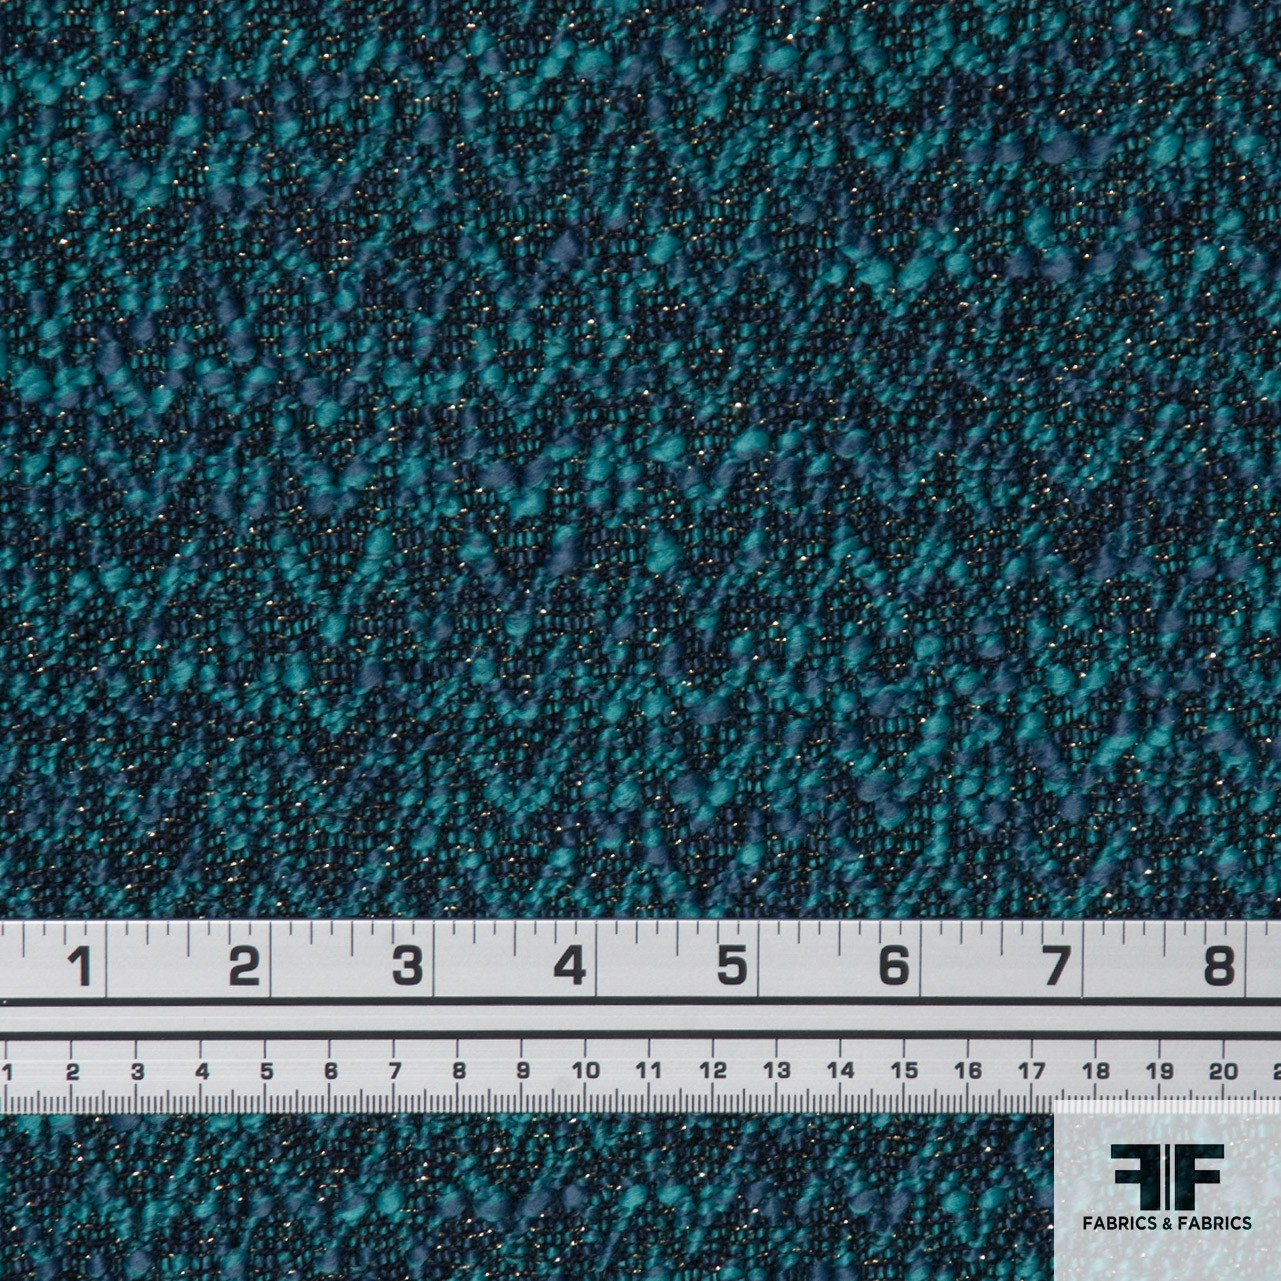 Textured Cotton Blend Tweed - Turquoise